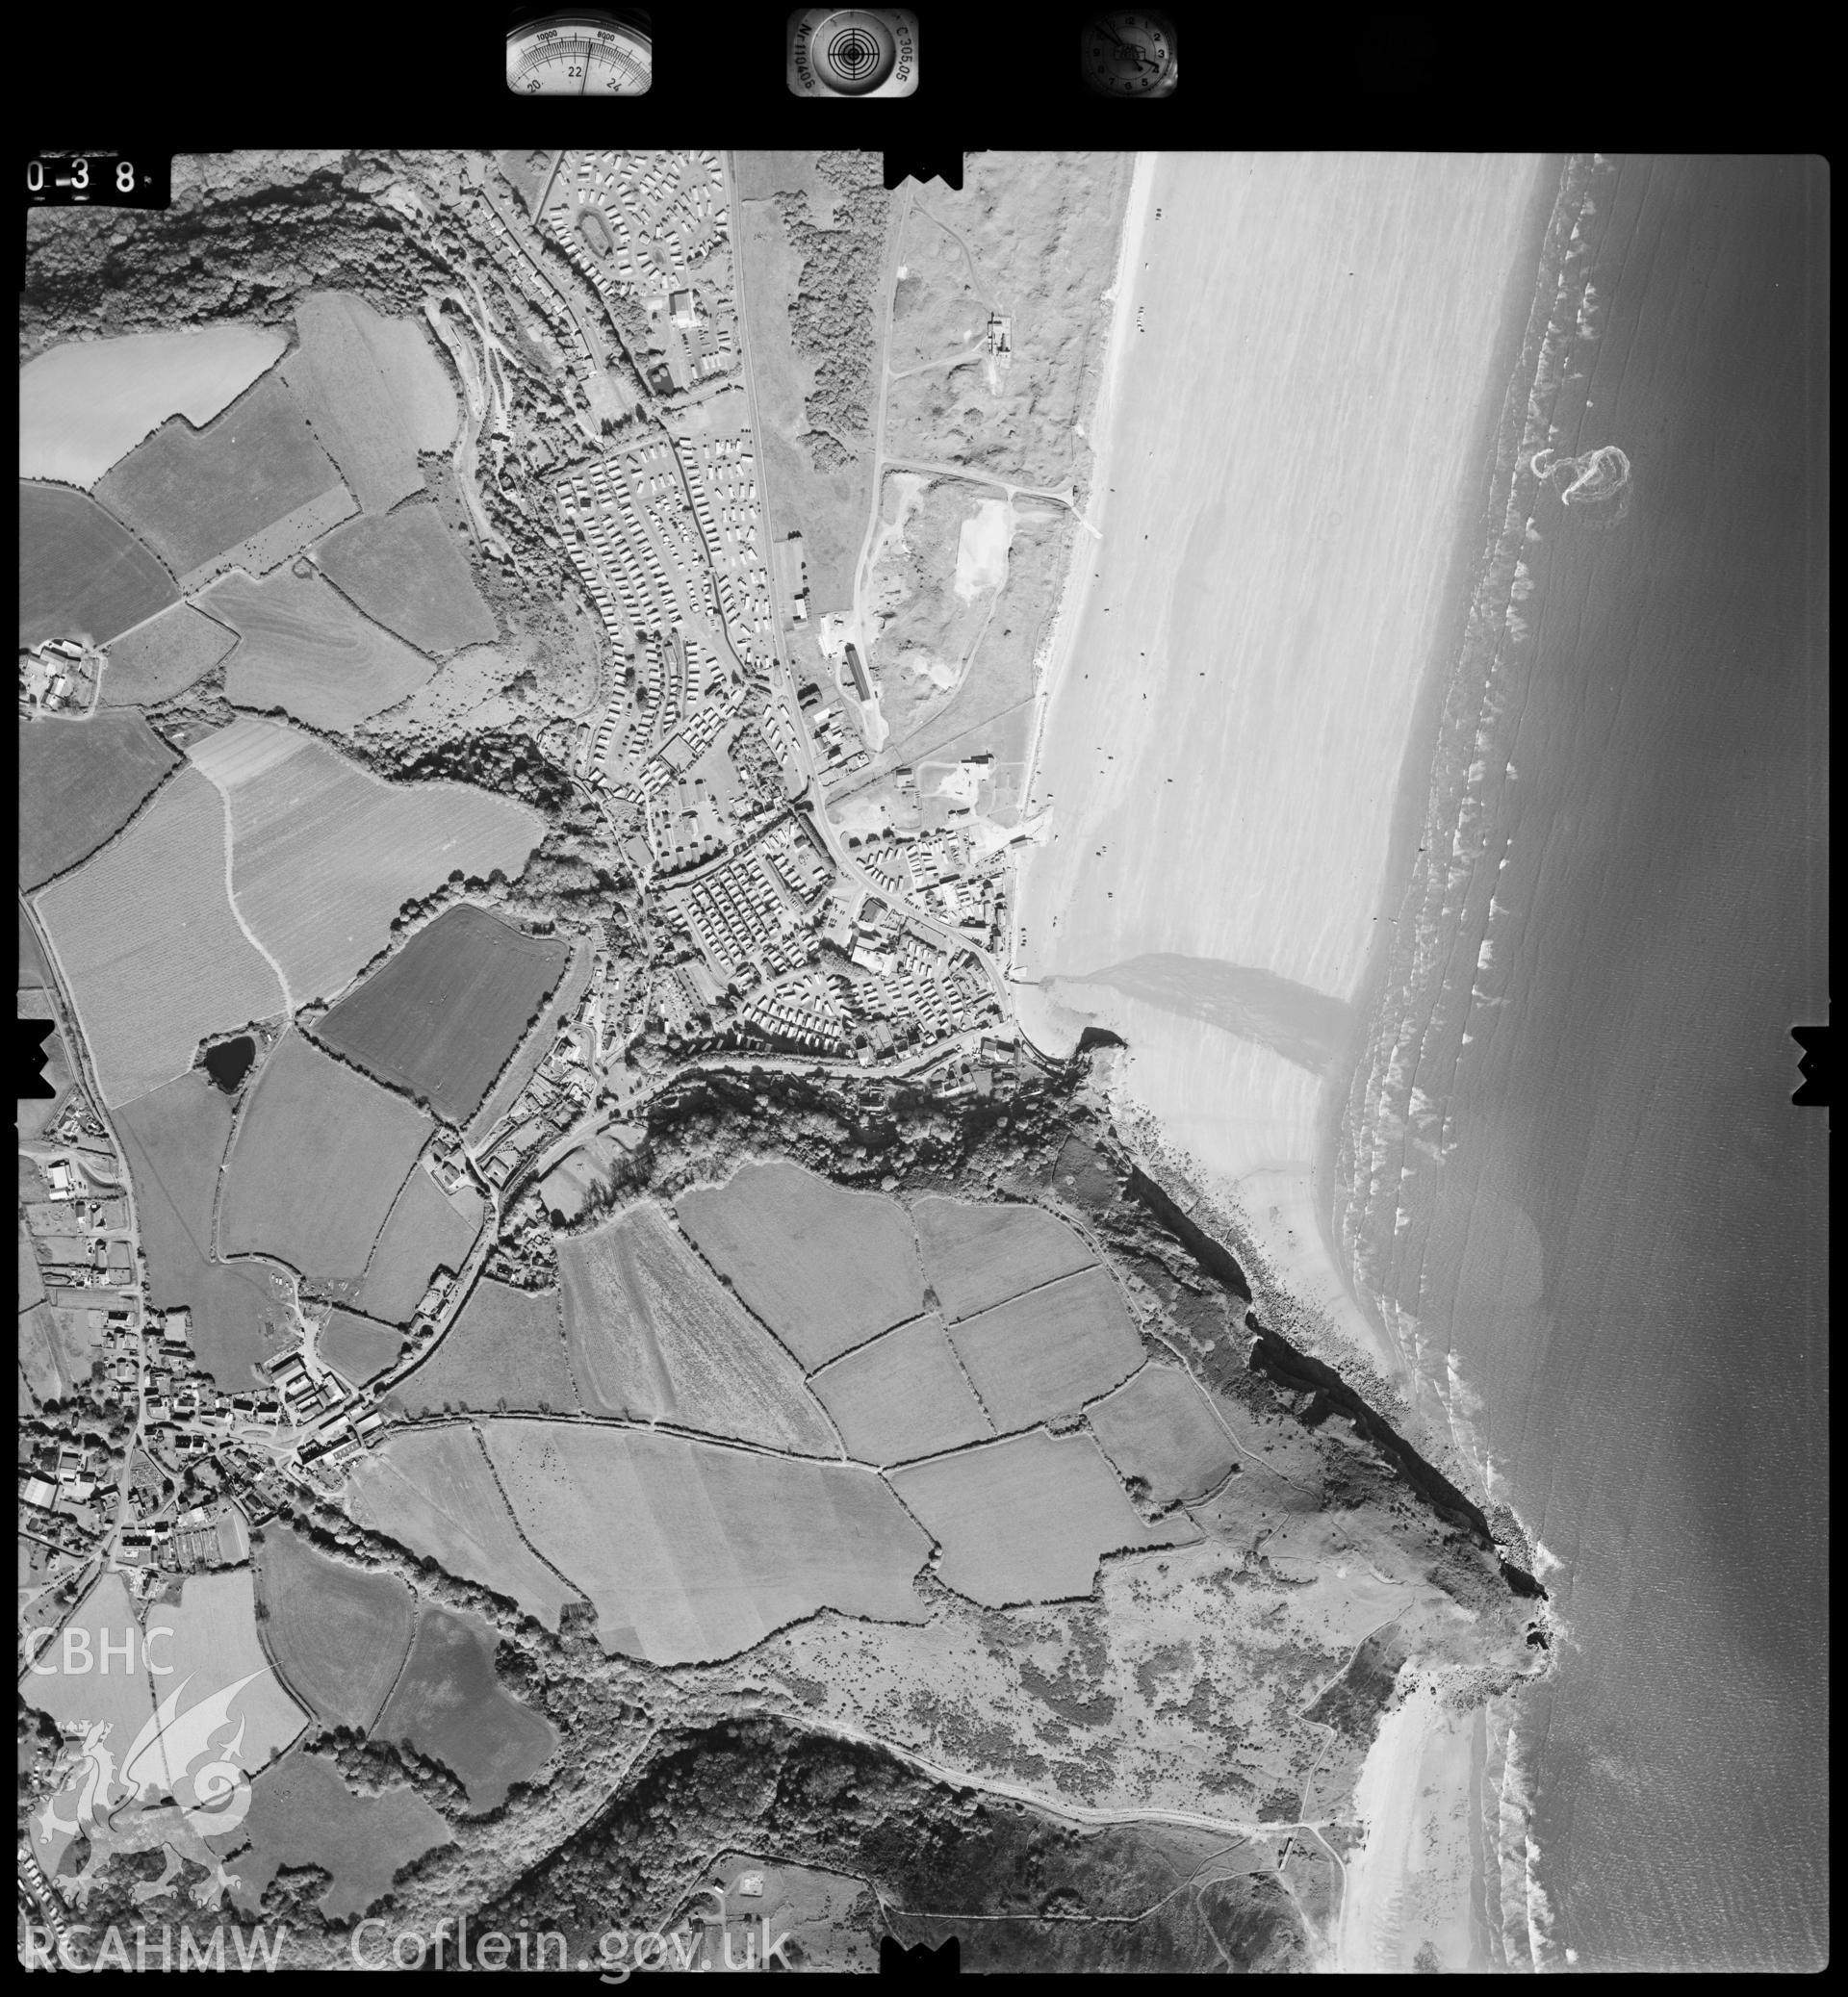 Digitized copy of an aerial photograph showing the Pendine area, taken by Ordnance Survey, 1997.